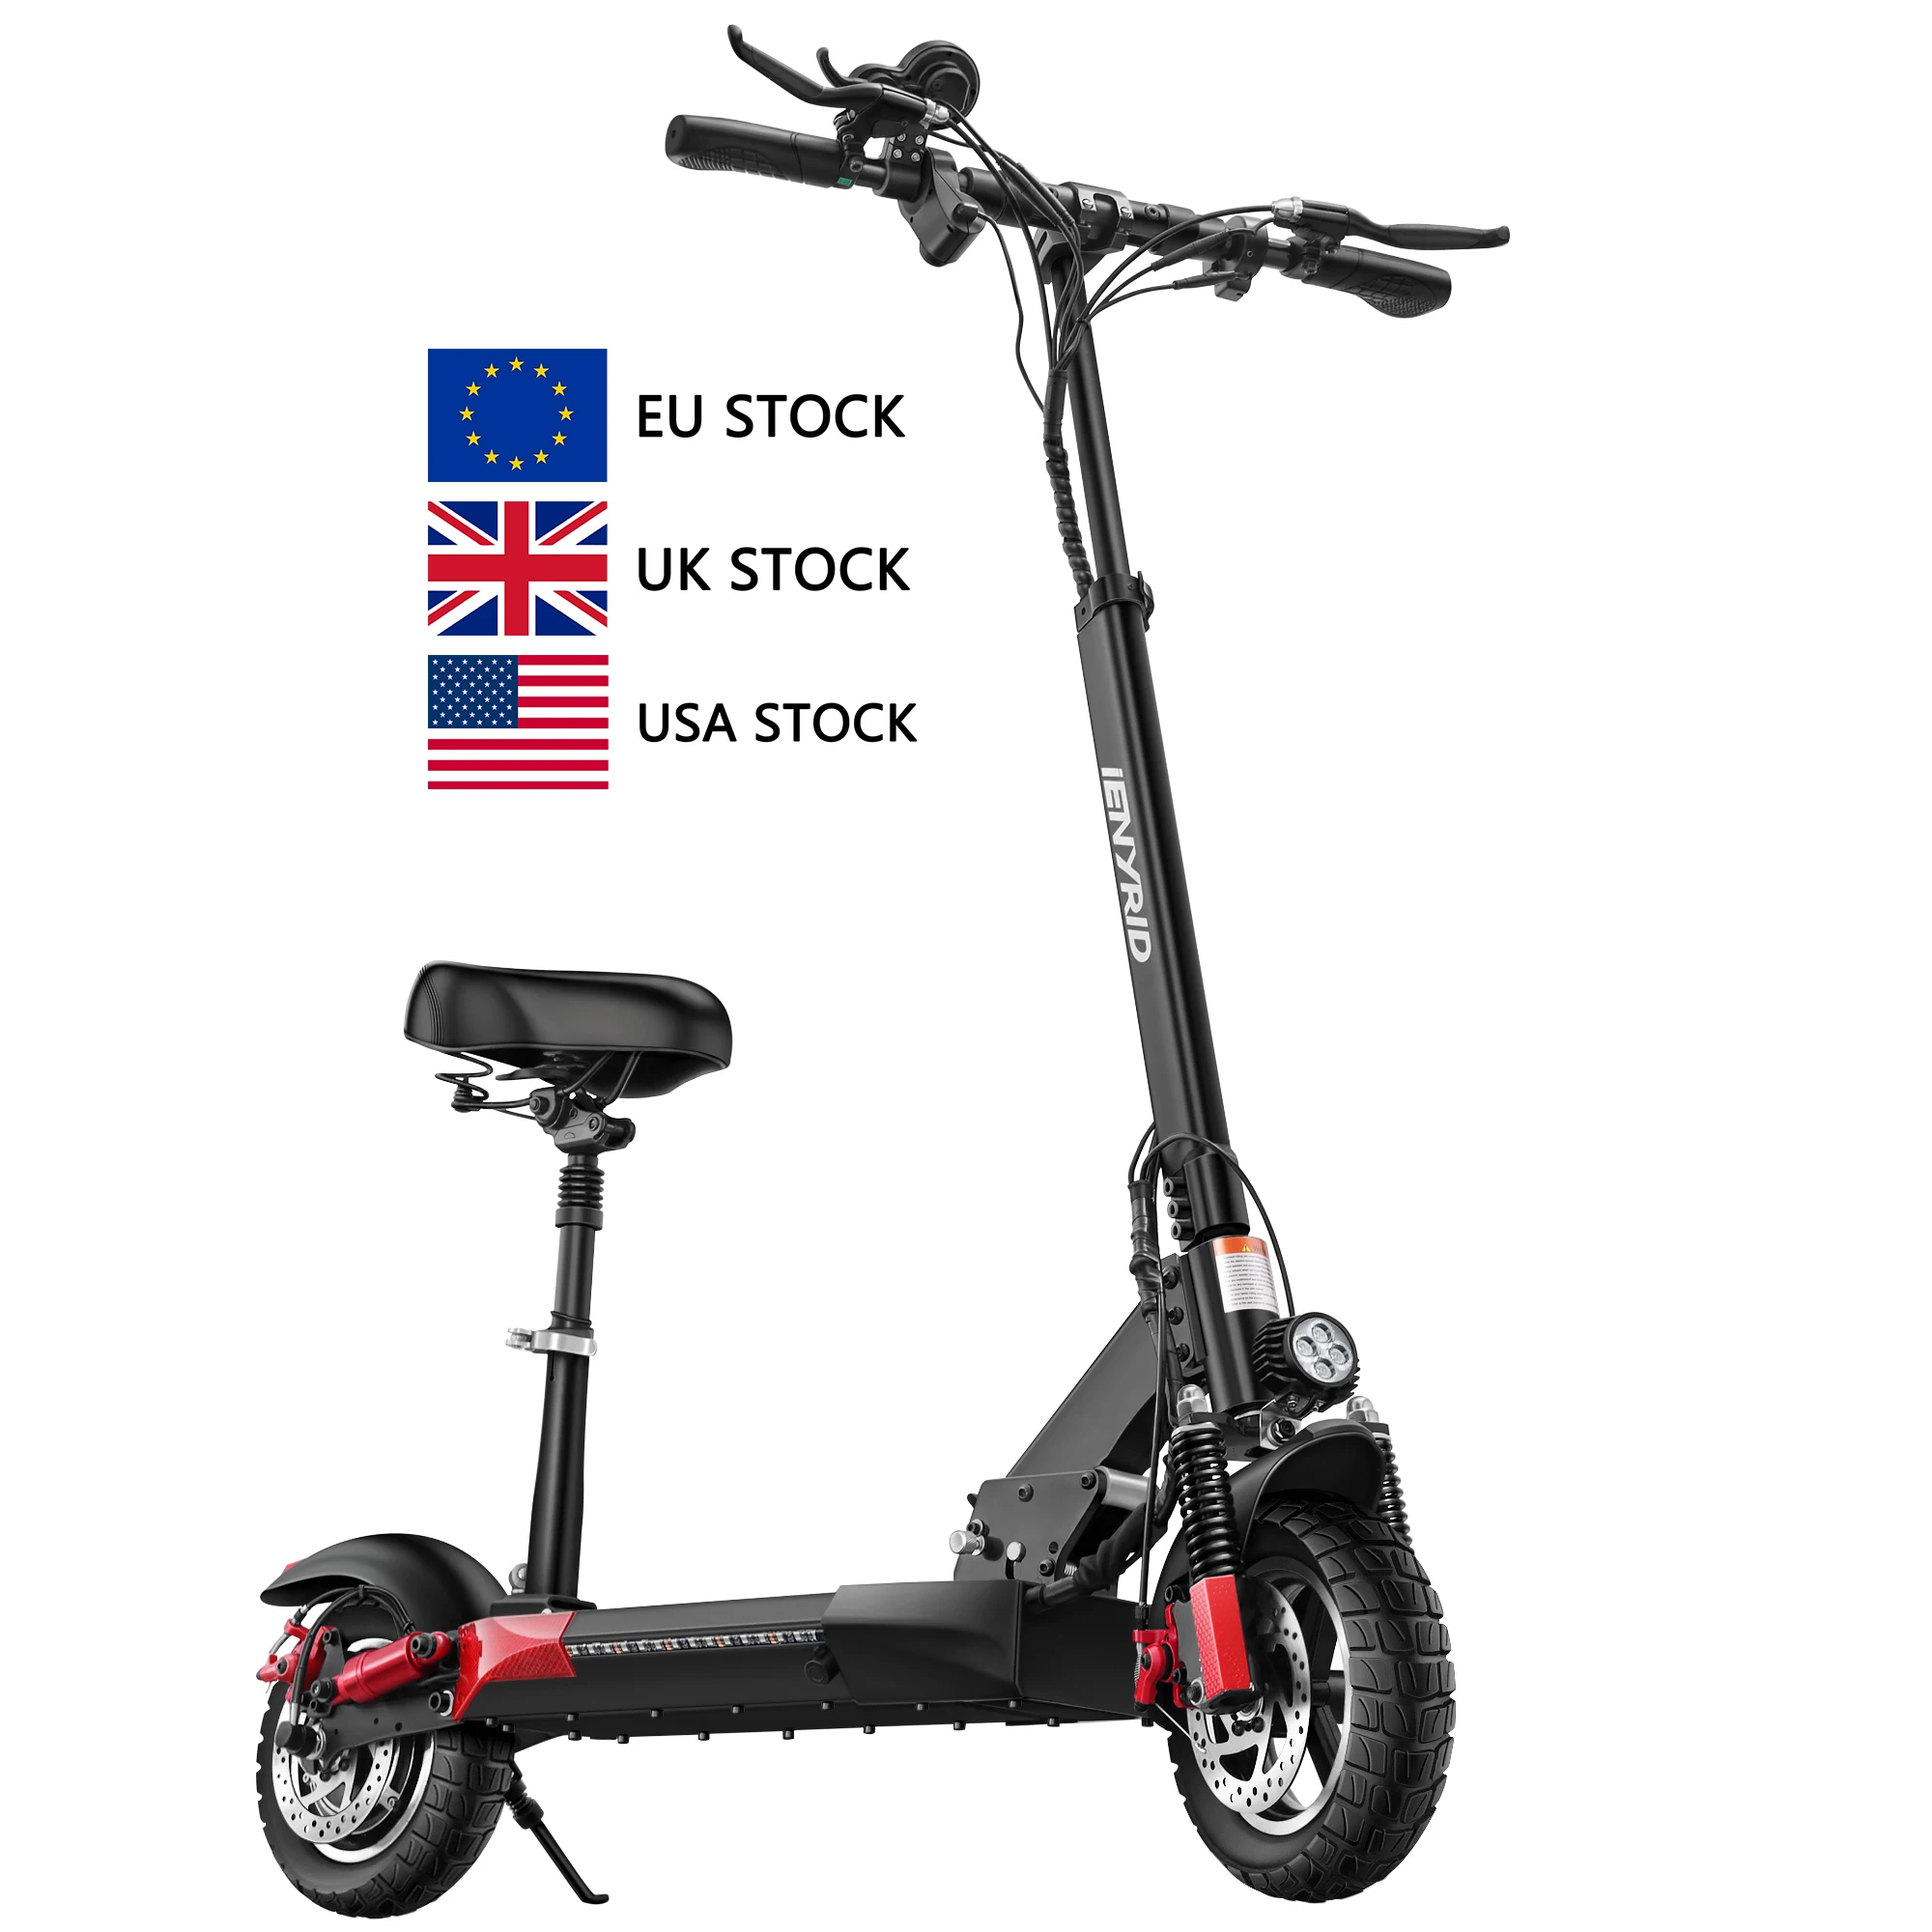 

iENYRID M4 PRO 16AH FCC ROHS CE Electric Scooter Folding electric 10" Off-road Tires 500W Motor Electric Scooter iENYRID M4 PRO